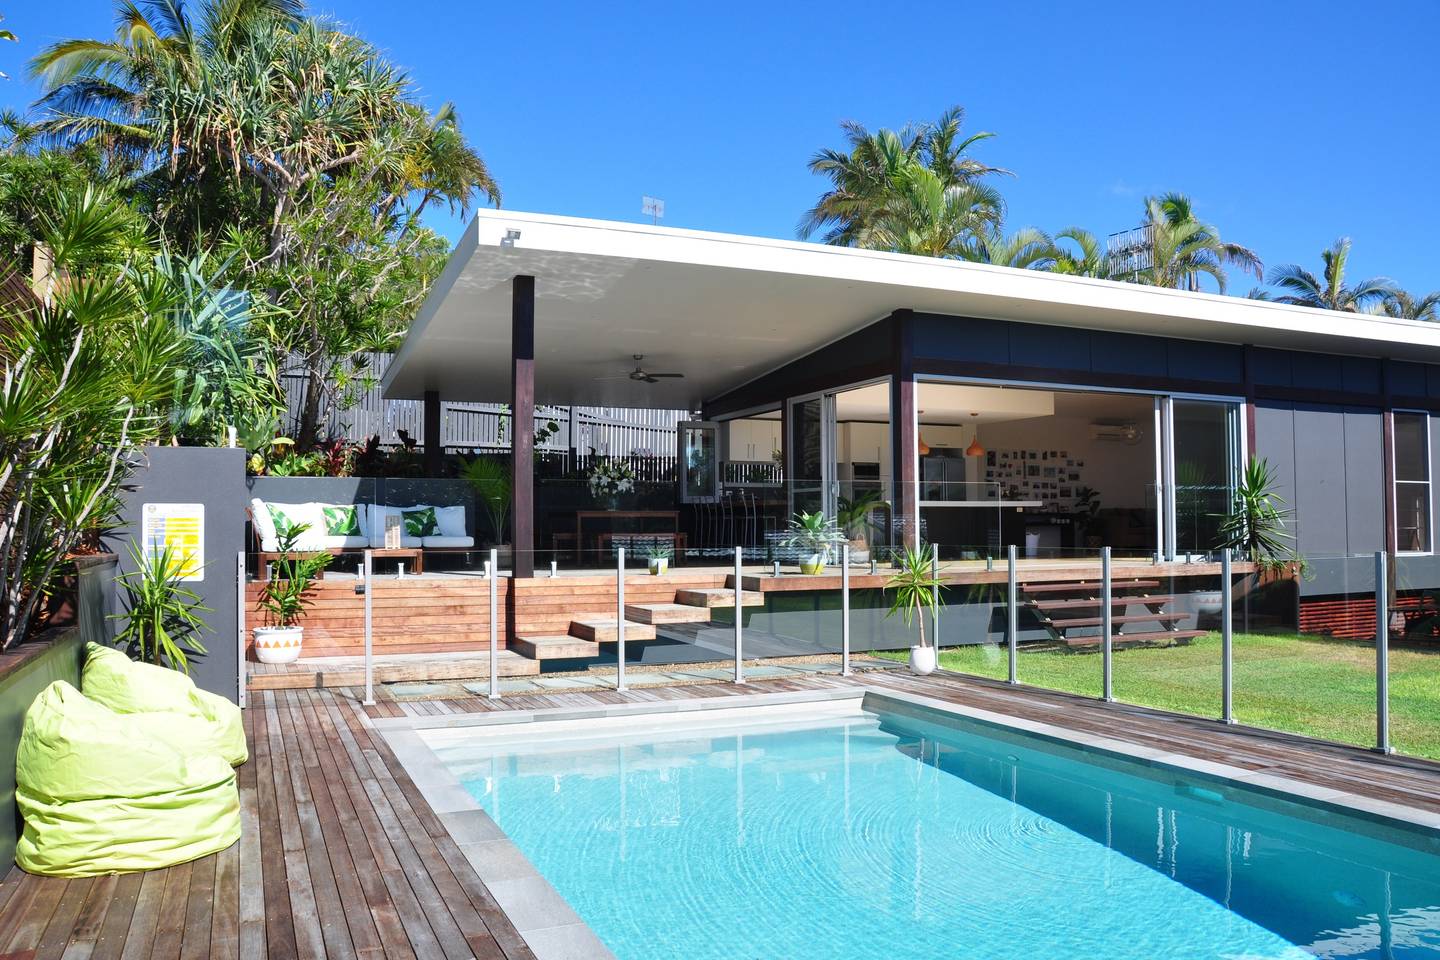 A large family friendly holiday home in Noosa